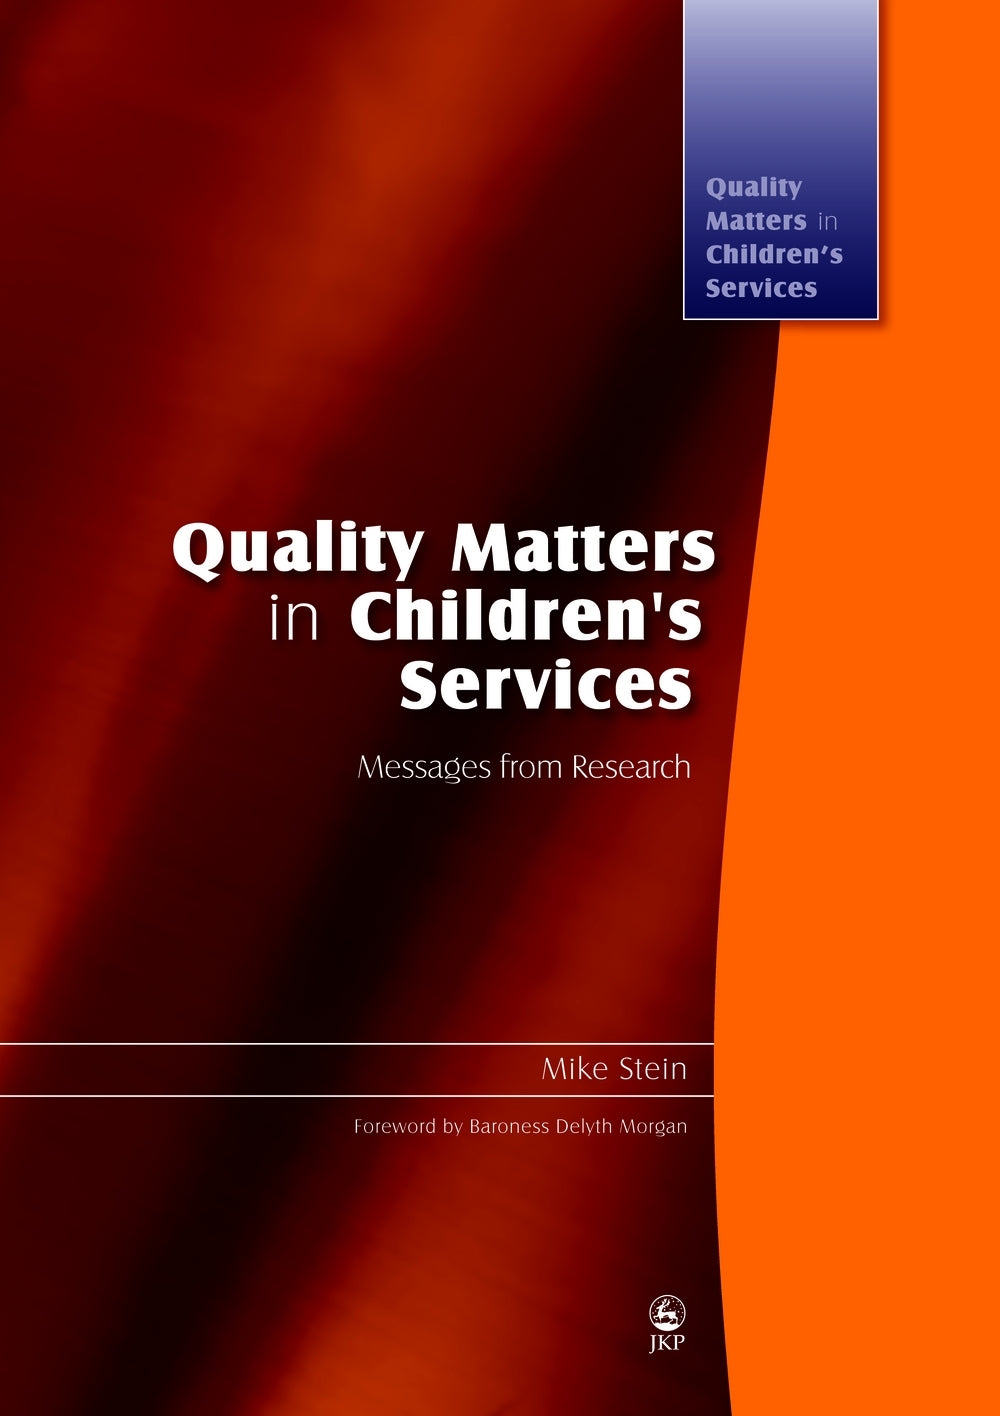 Quality Matters in Children's Services by Mike Stein, Mike Stein, Delyth Morgan